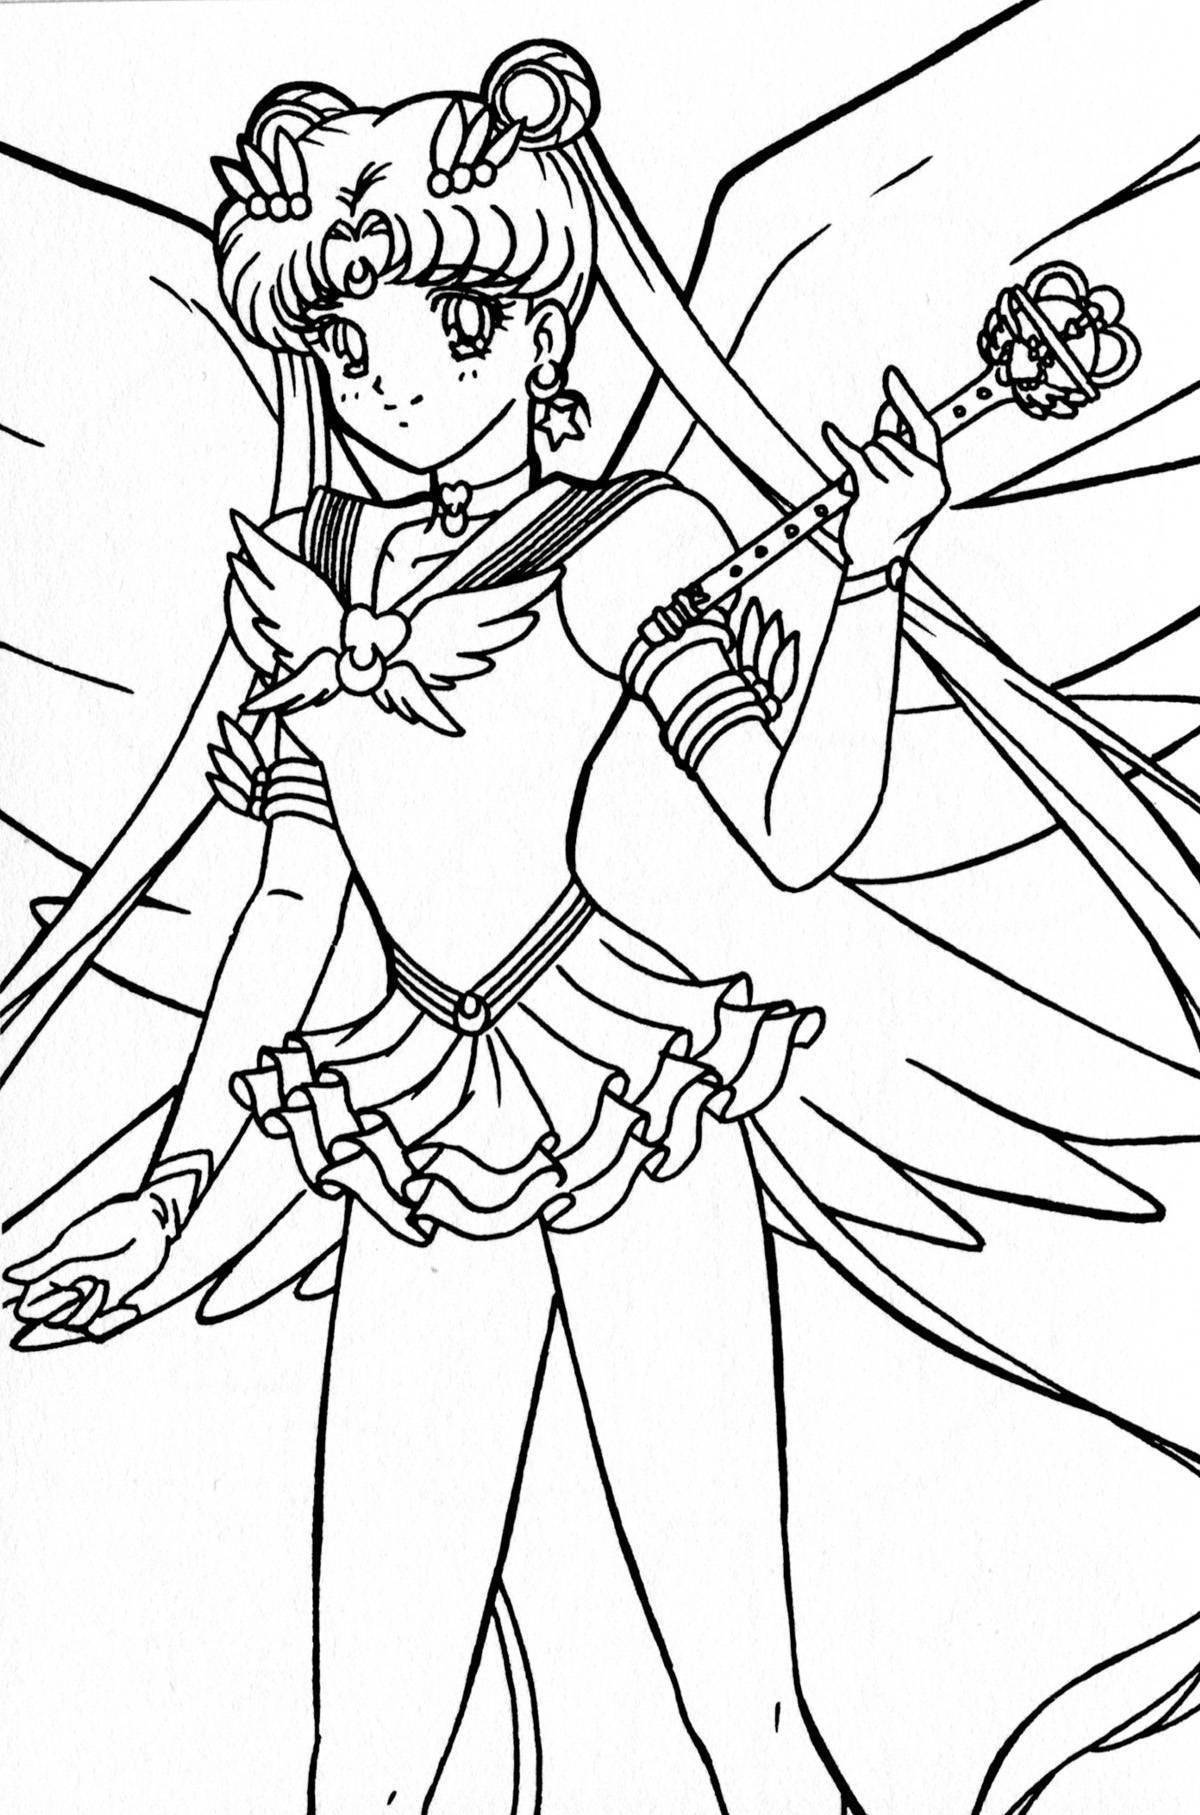 Exquisite sailor moon coloring book